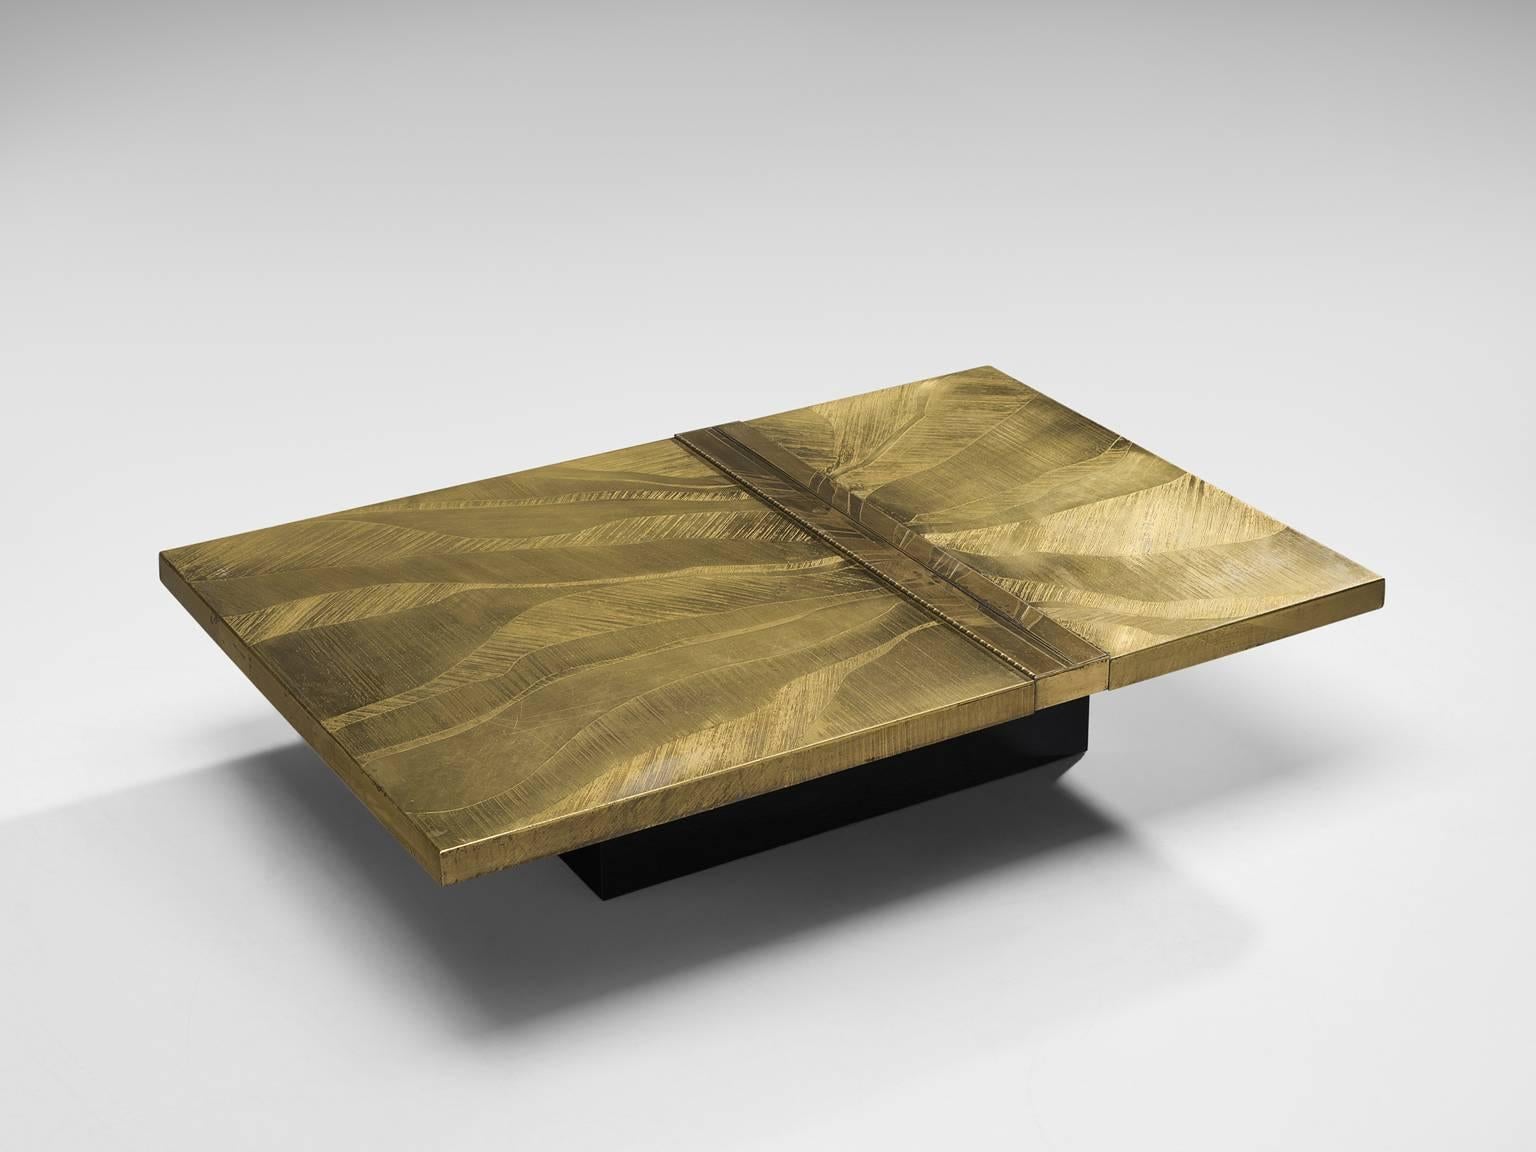 Christian Krekels, coffee table, brass and enameled steel, Belgium, circa 1970.

This rectangular sculptural coffee table was probably a private commission, as this table is very luxurious and refined. The technique that is used is acid etching in